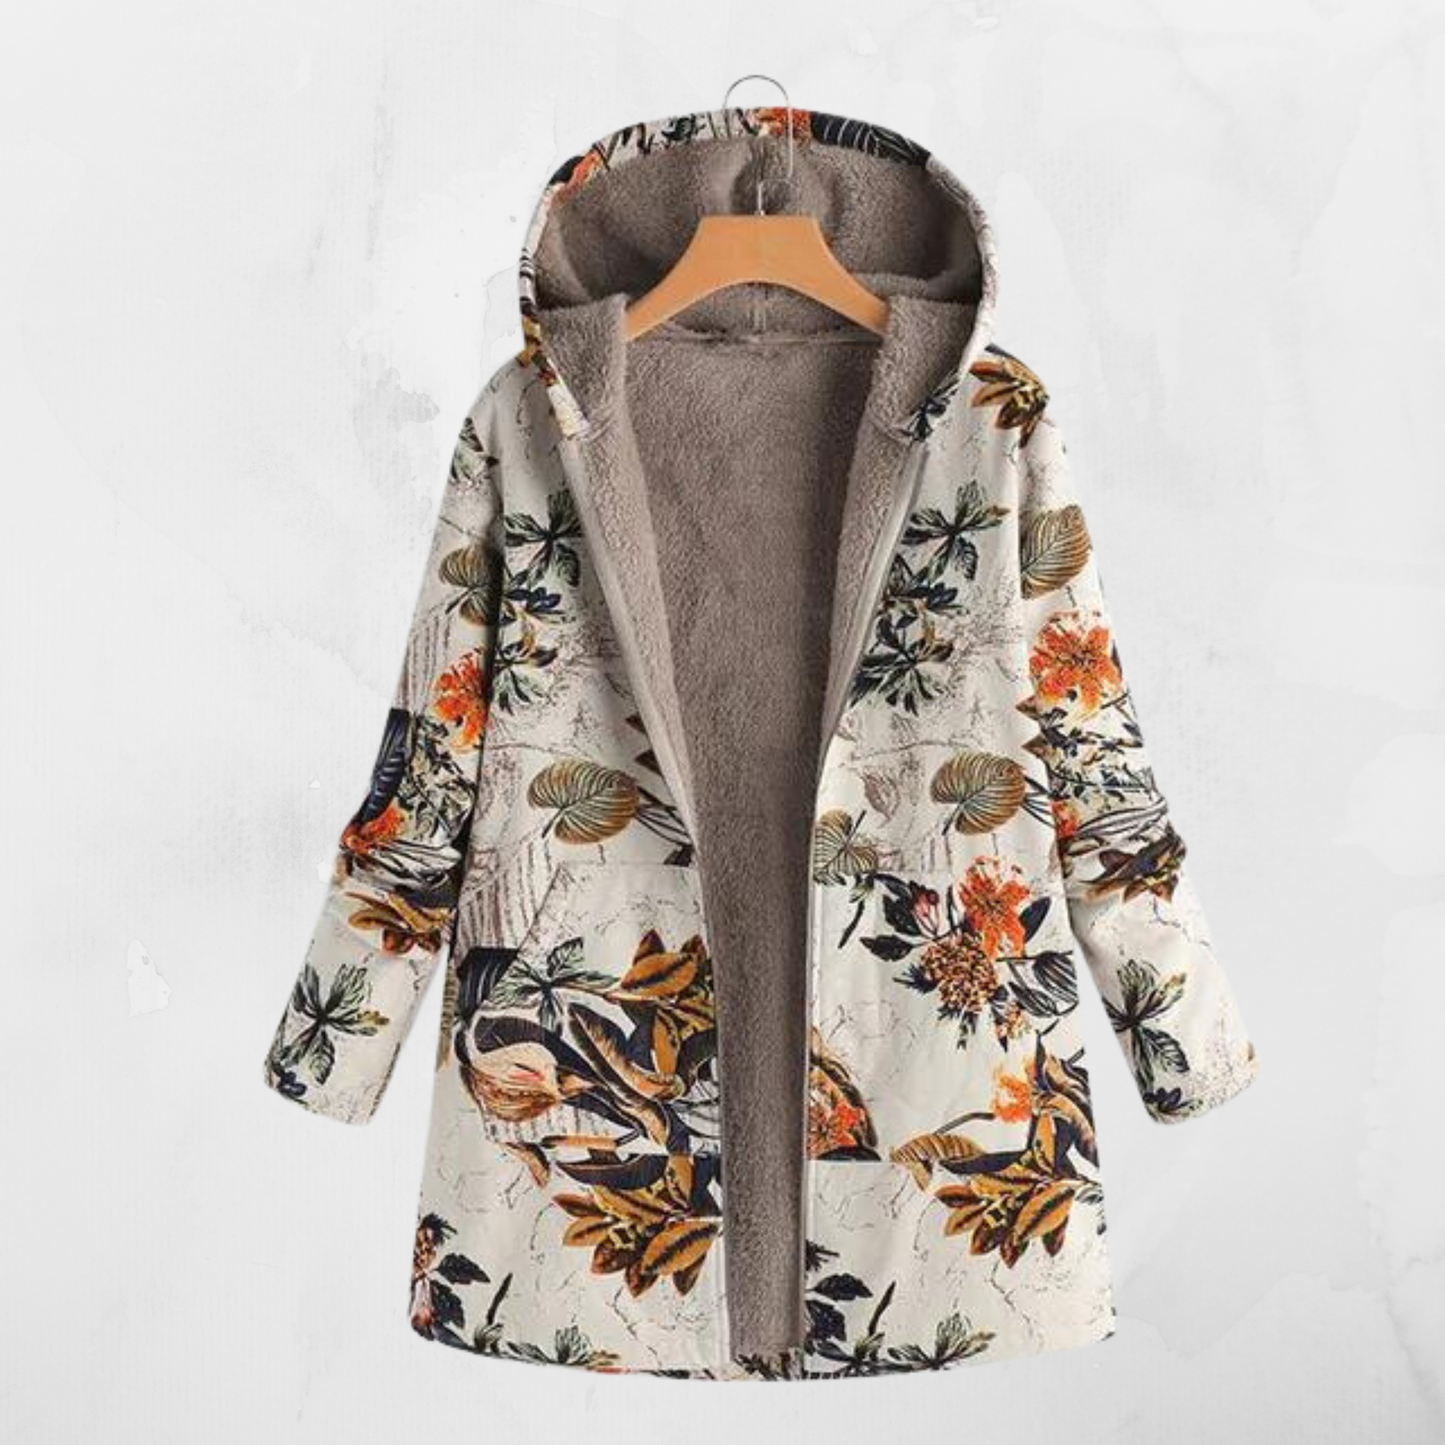 Clarissa - Printed coat with long sleeves